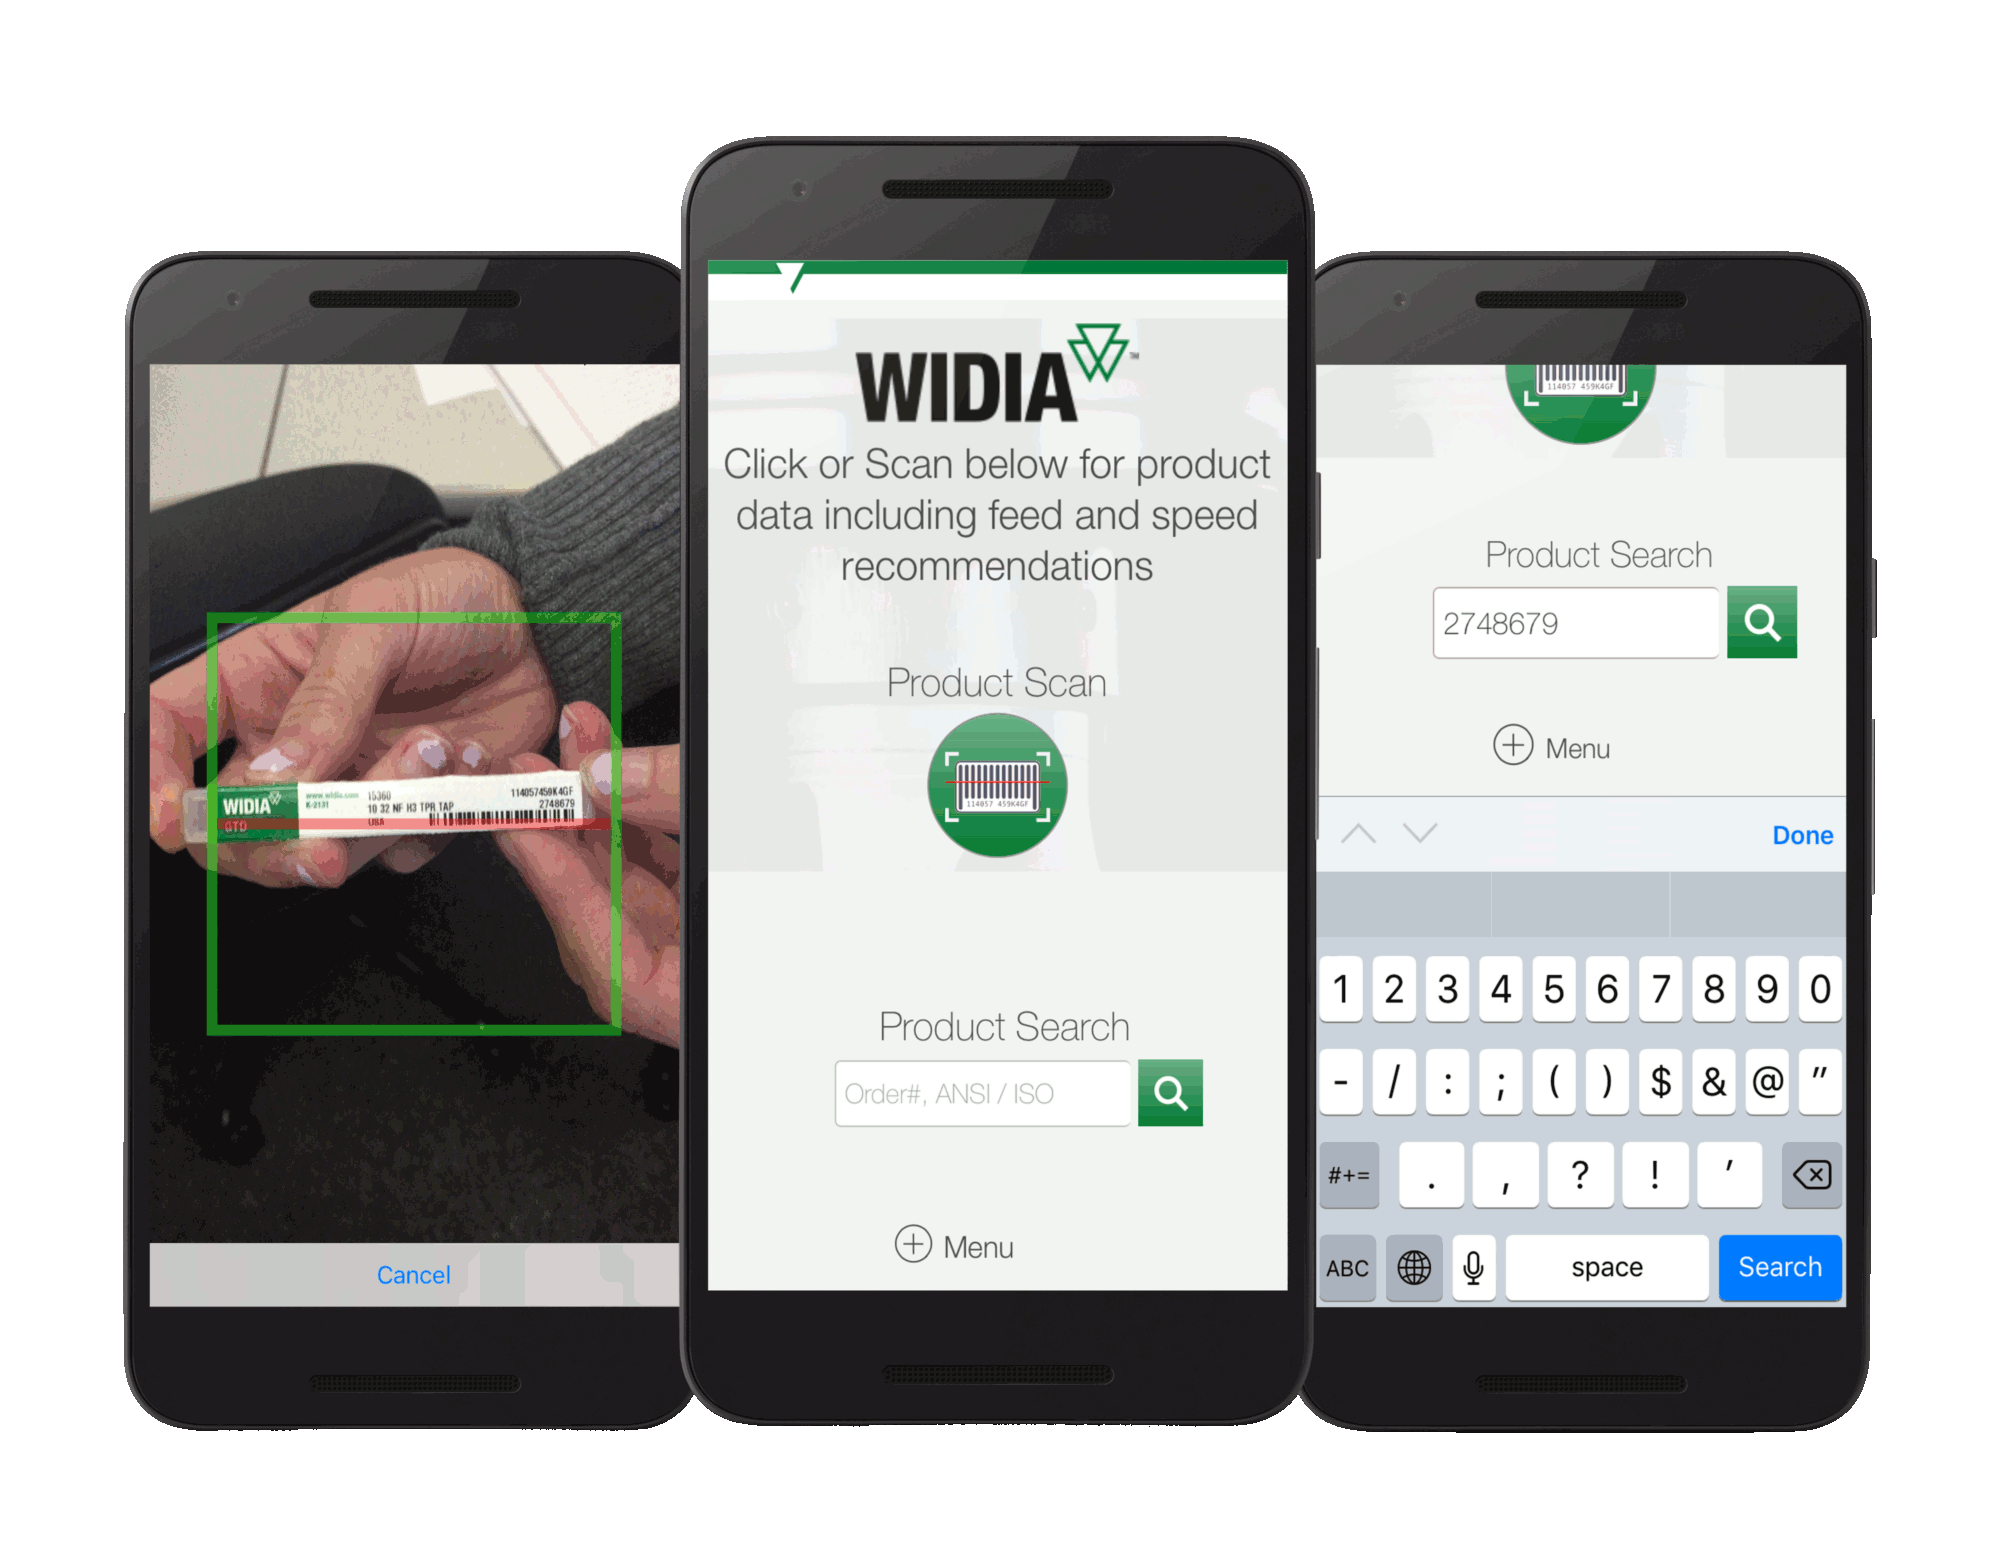 Feeds, Speeds, and Product Dimensional Data in the Palm of Your Hand